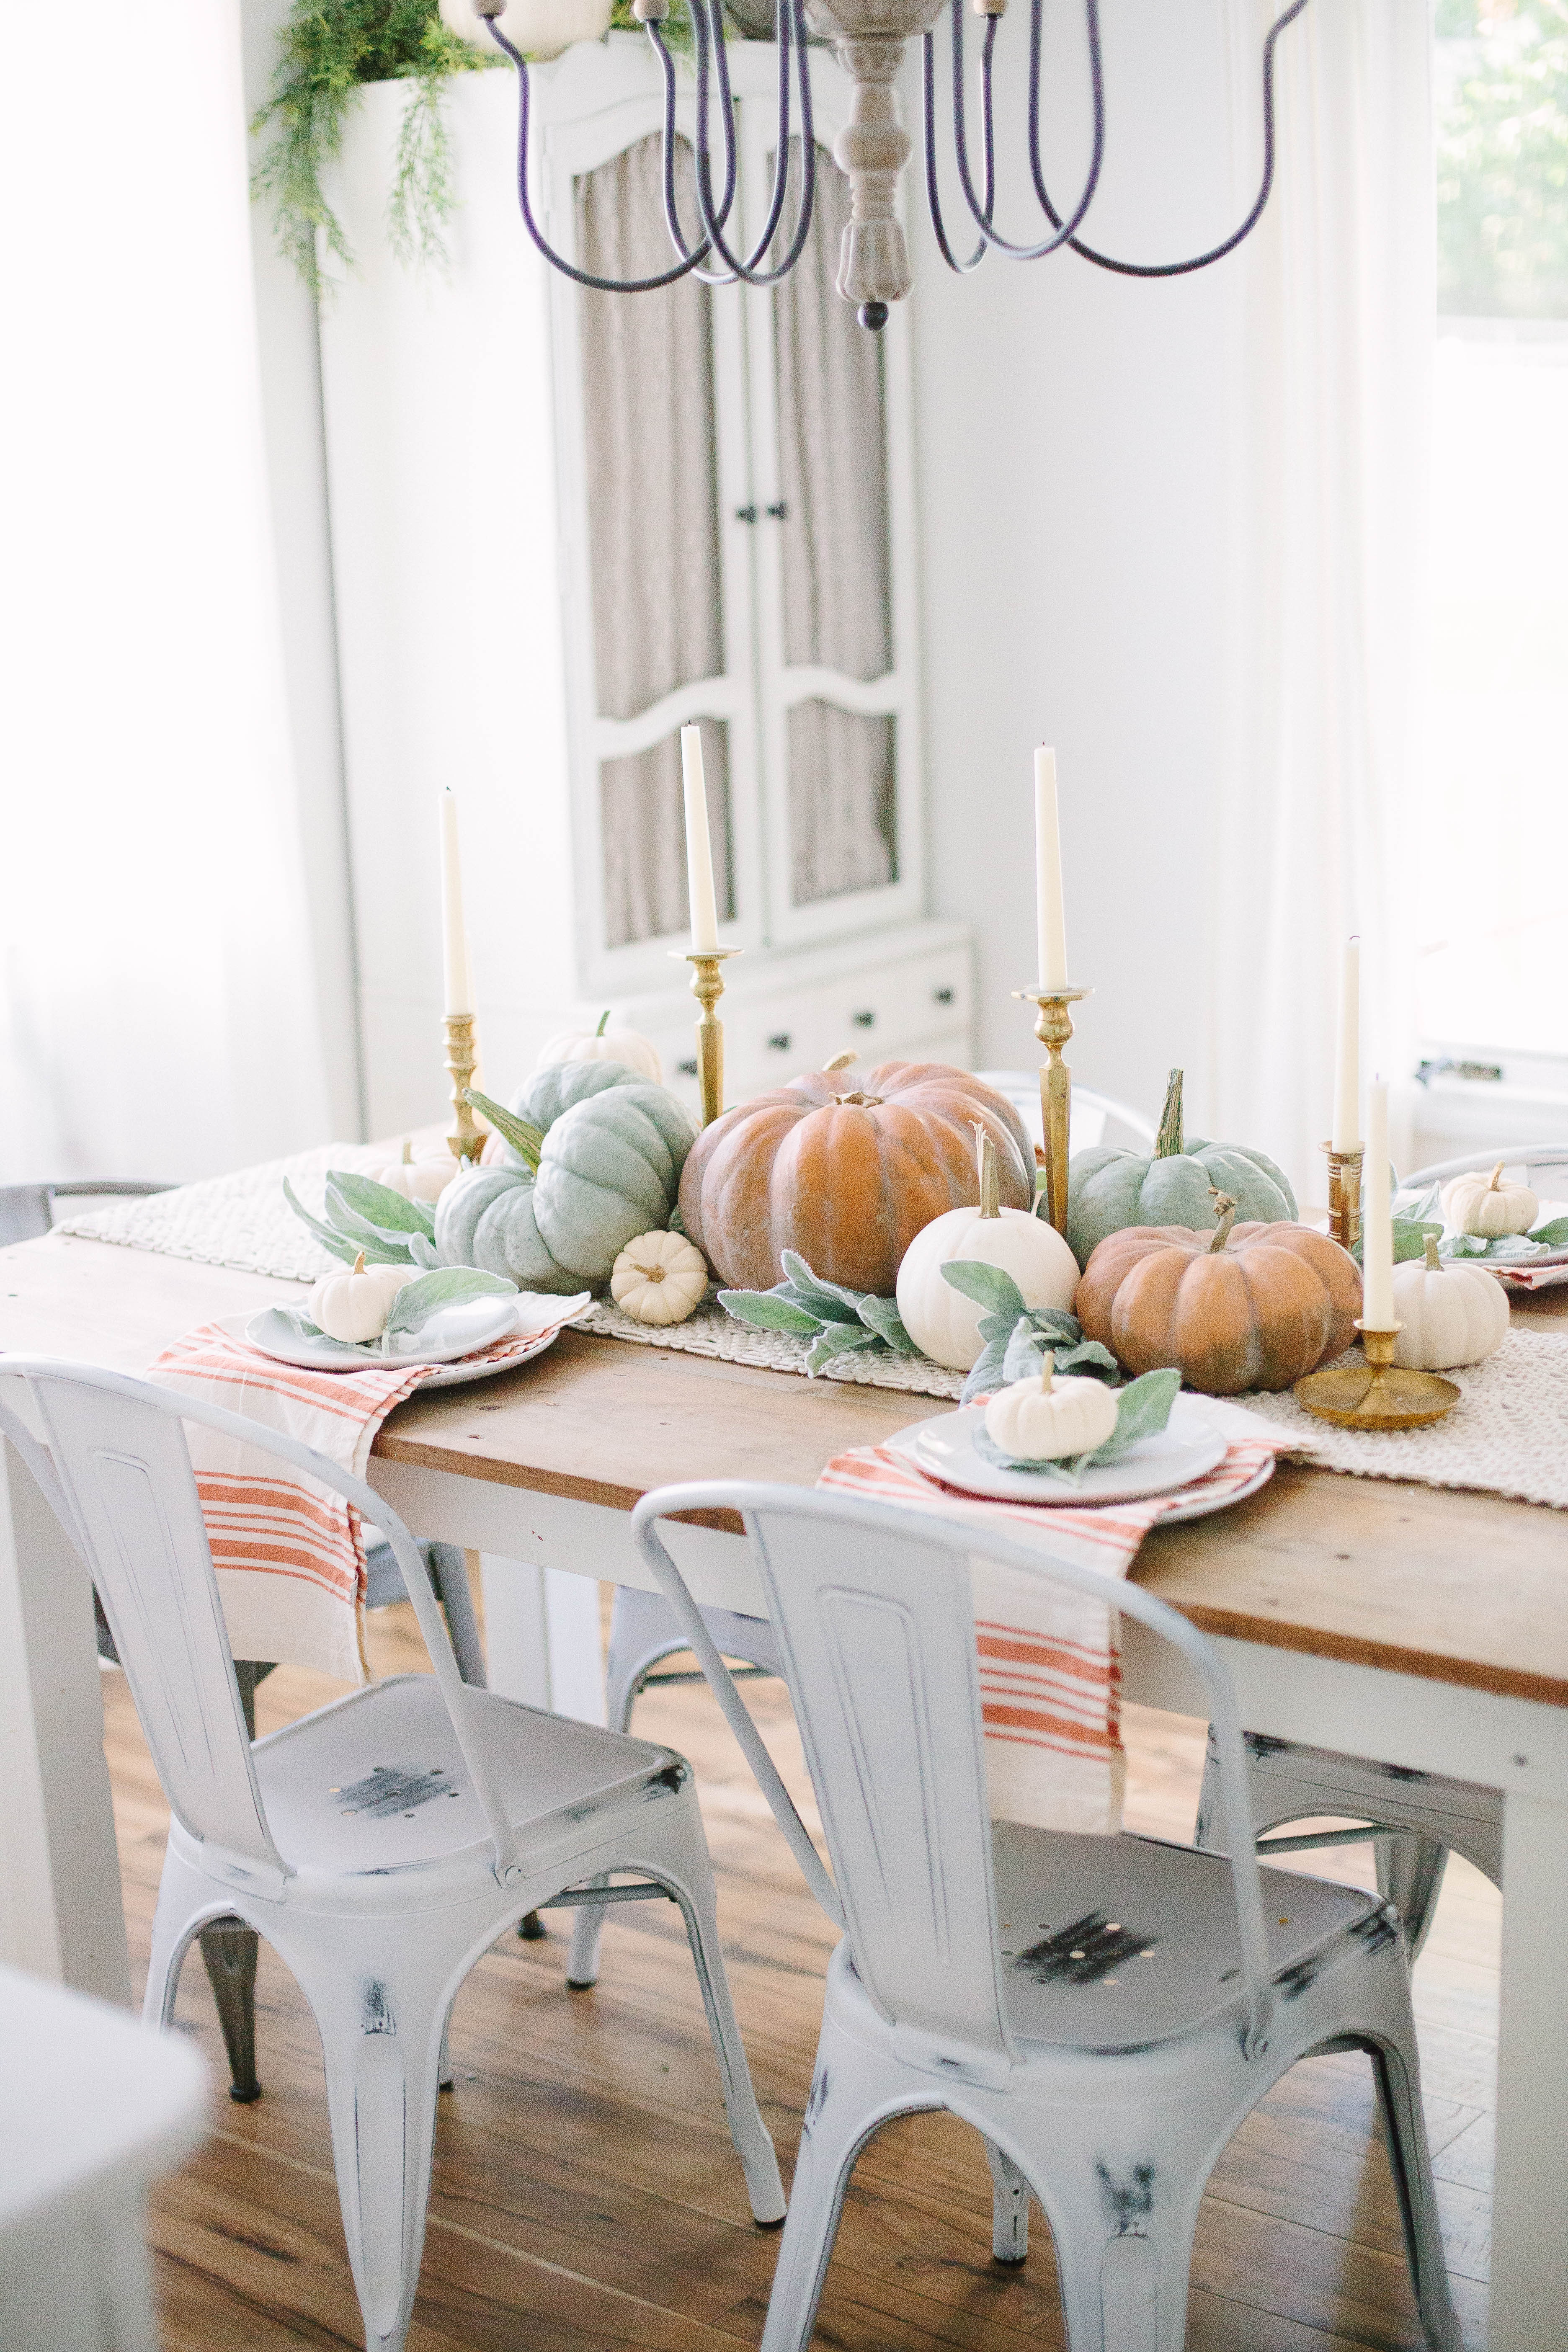 This simple Fall Cottage Dining Room uses neutral tones and natural elements to bring a the fall season into your space with sophistication and ease.